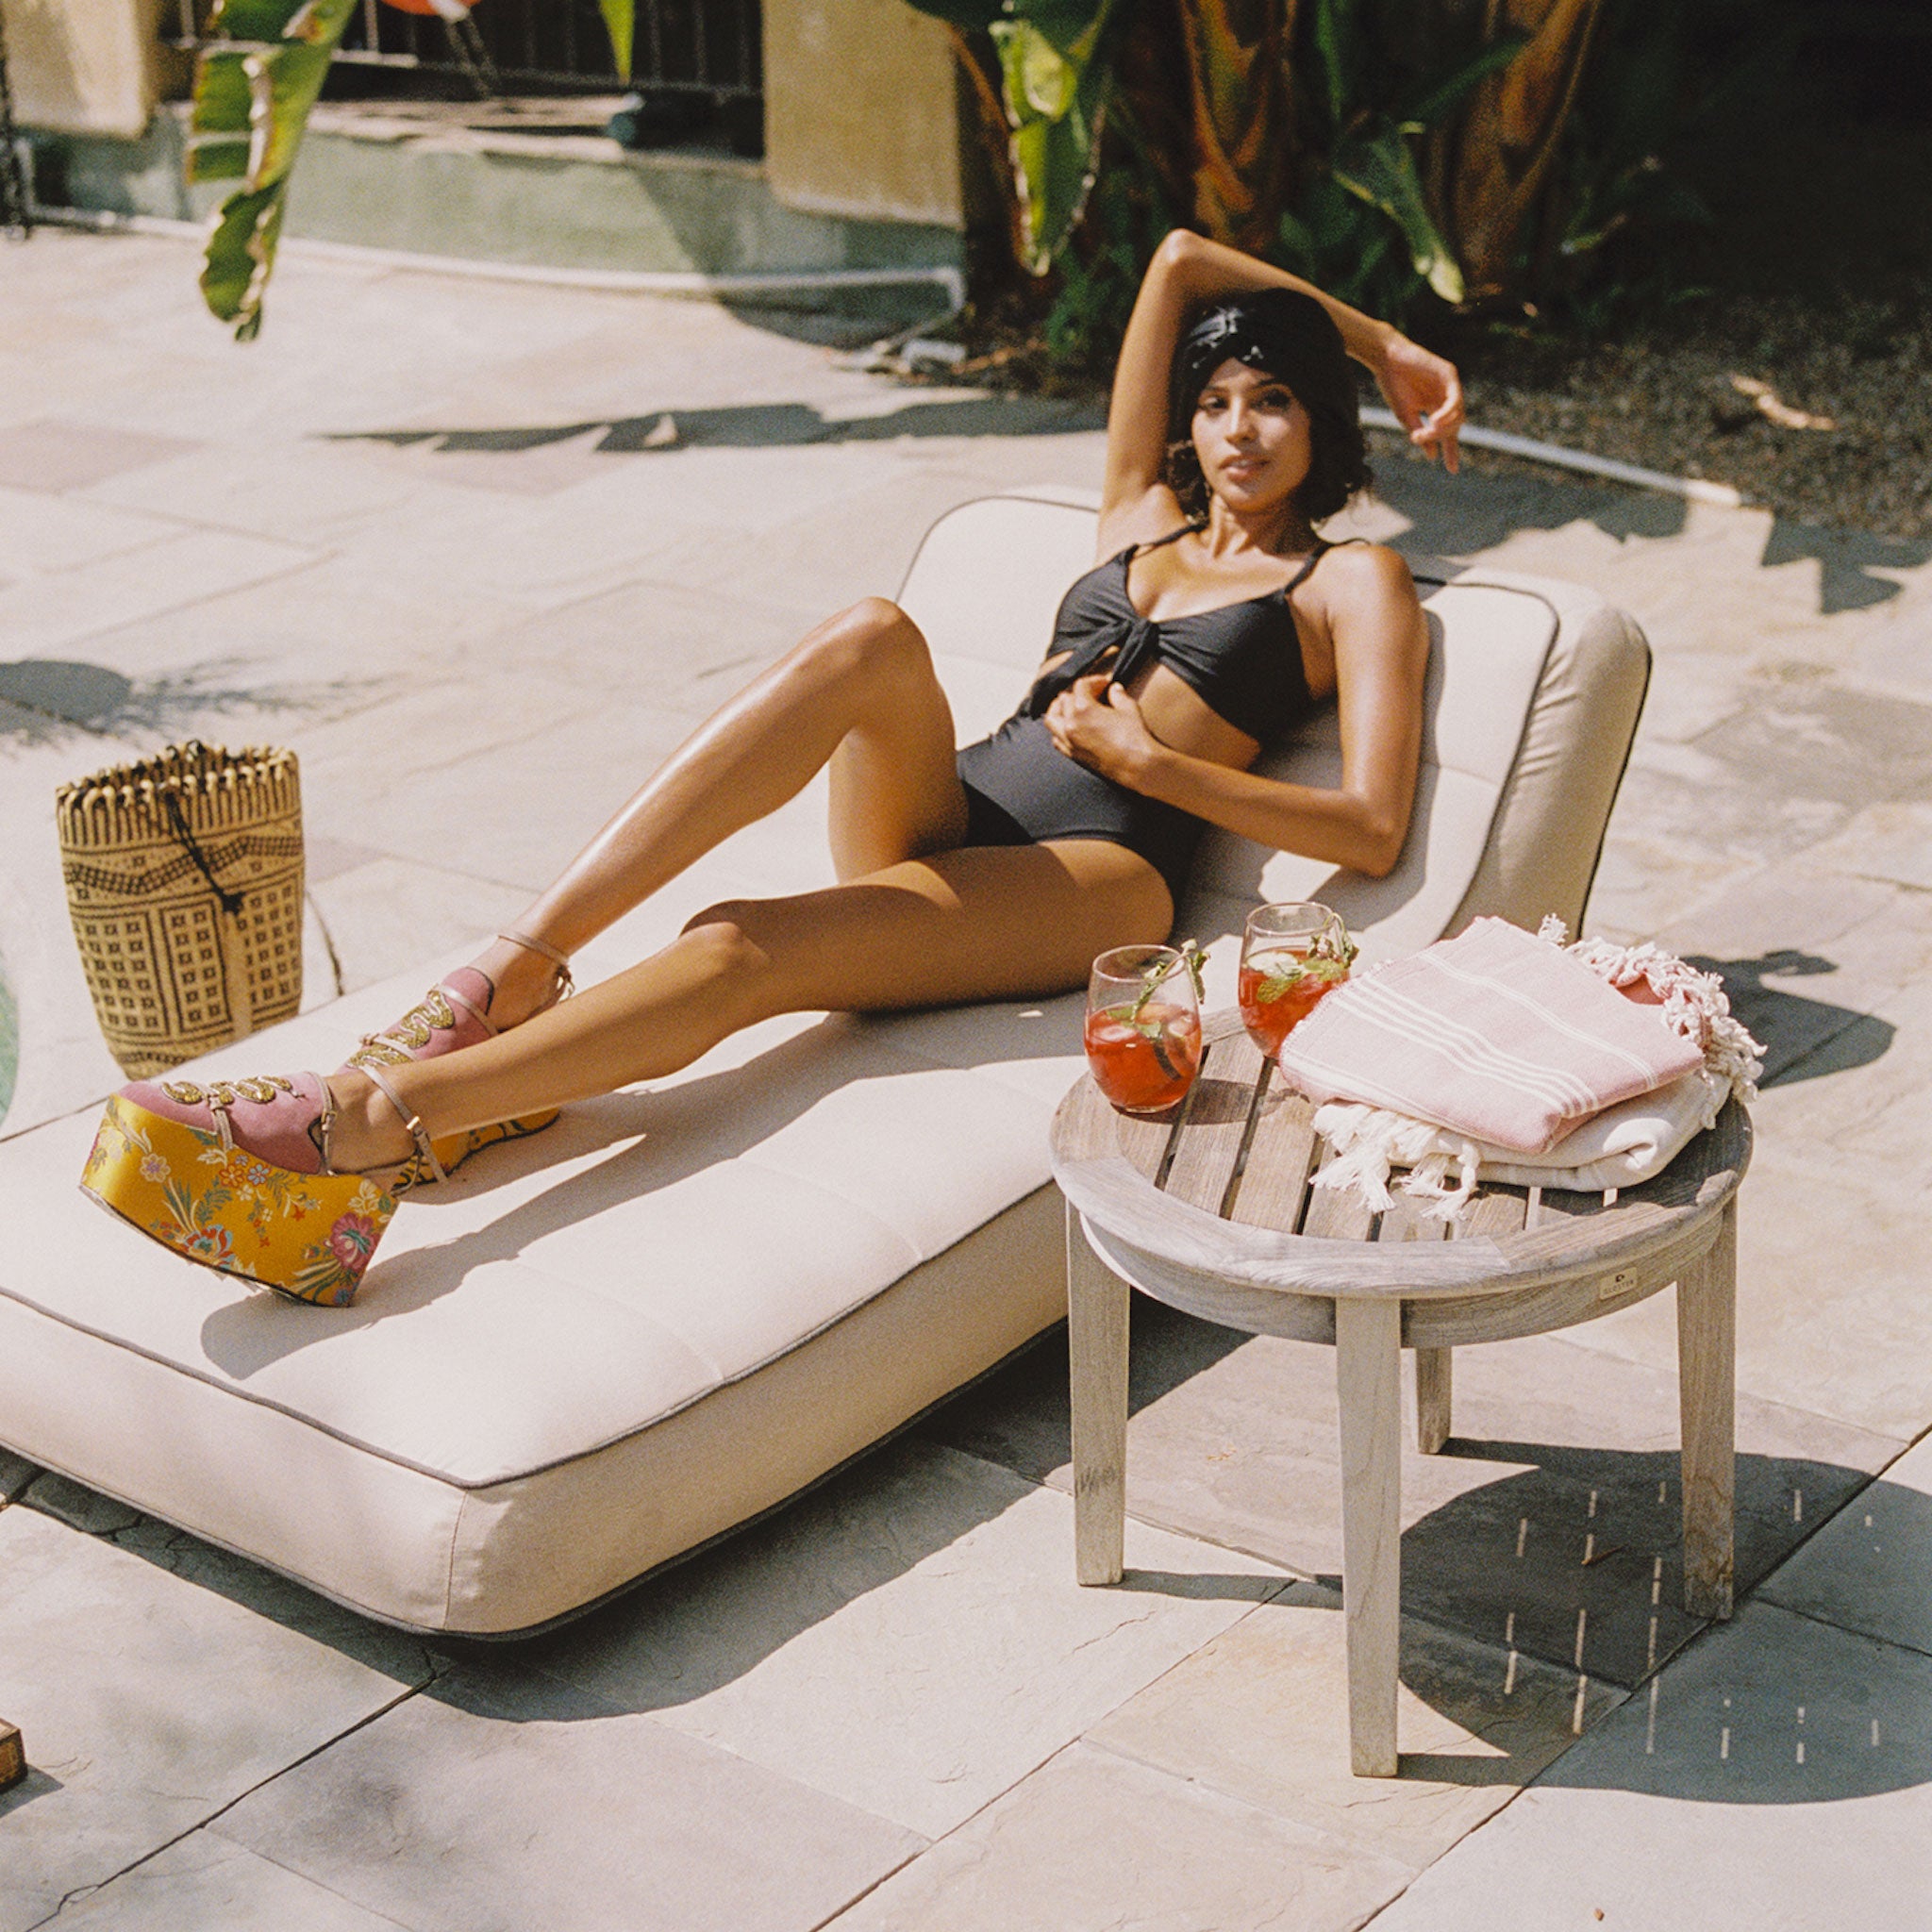 A women laying on a brown tan luxury pool float by the side of a swimming pool with a basket and table next to her.